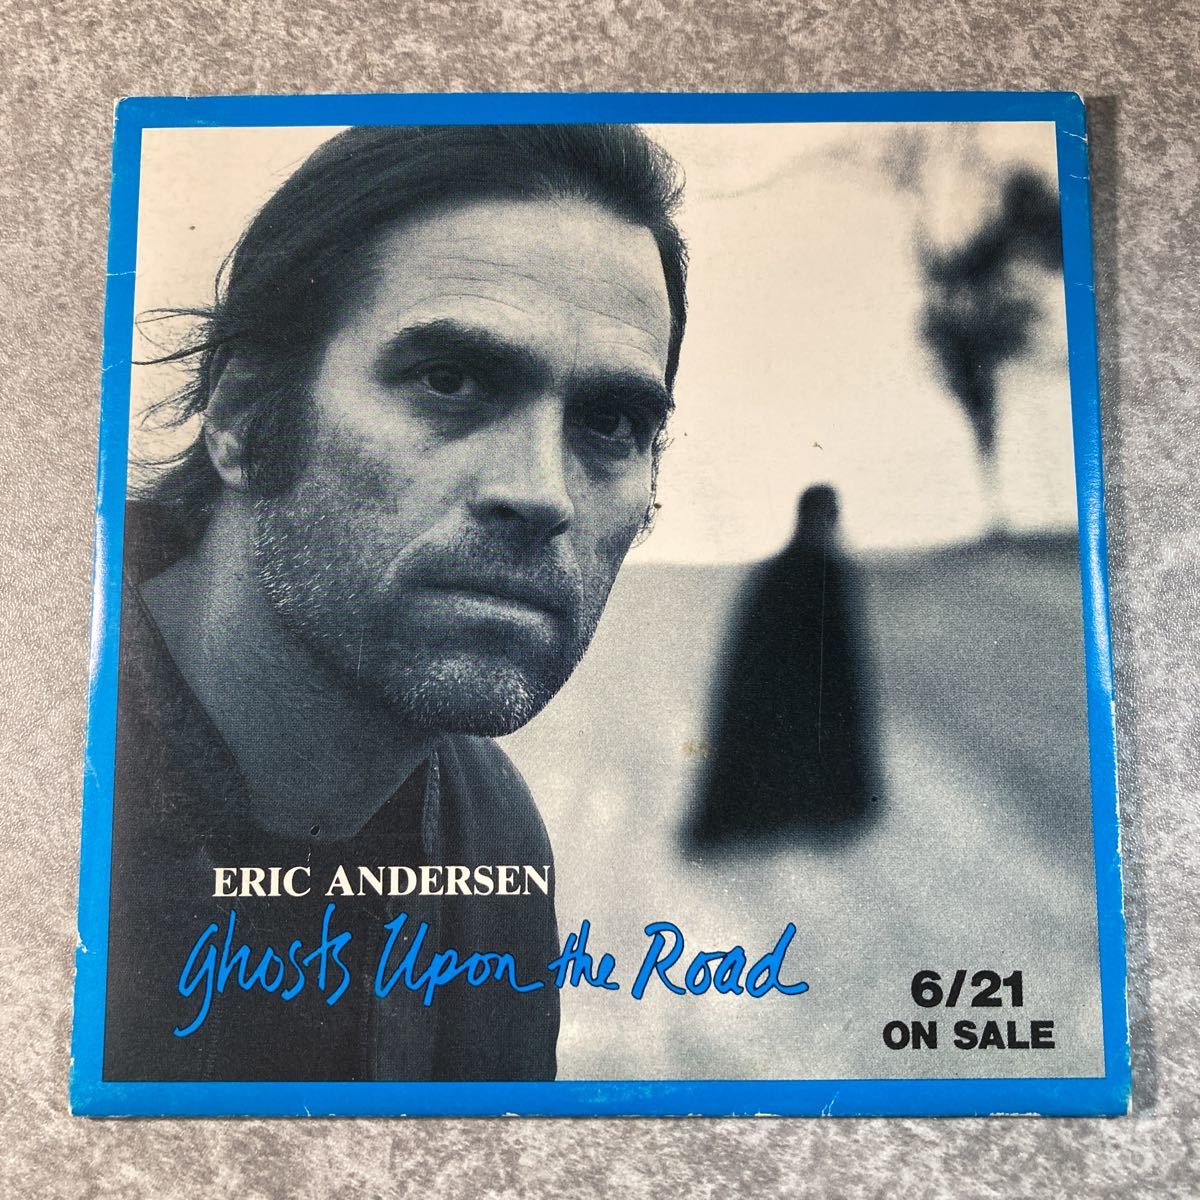 ERIC ANDERSEN / GHOSTS UPON THE ROAD